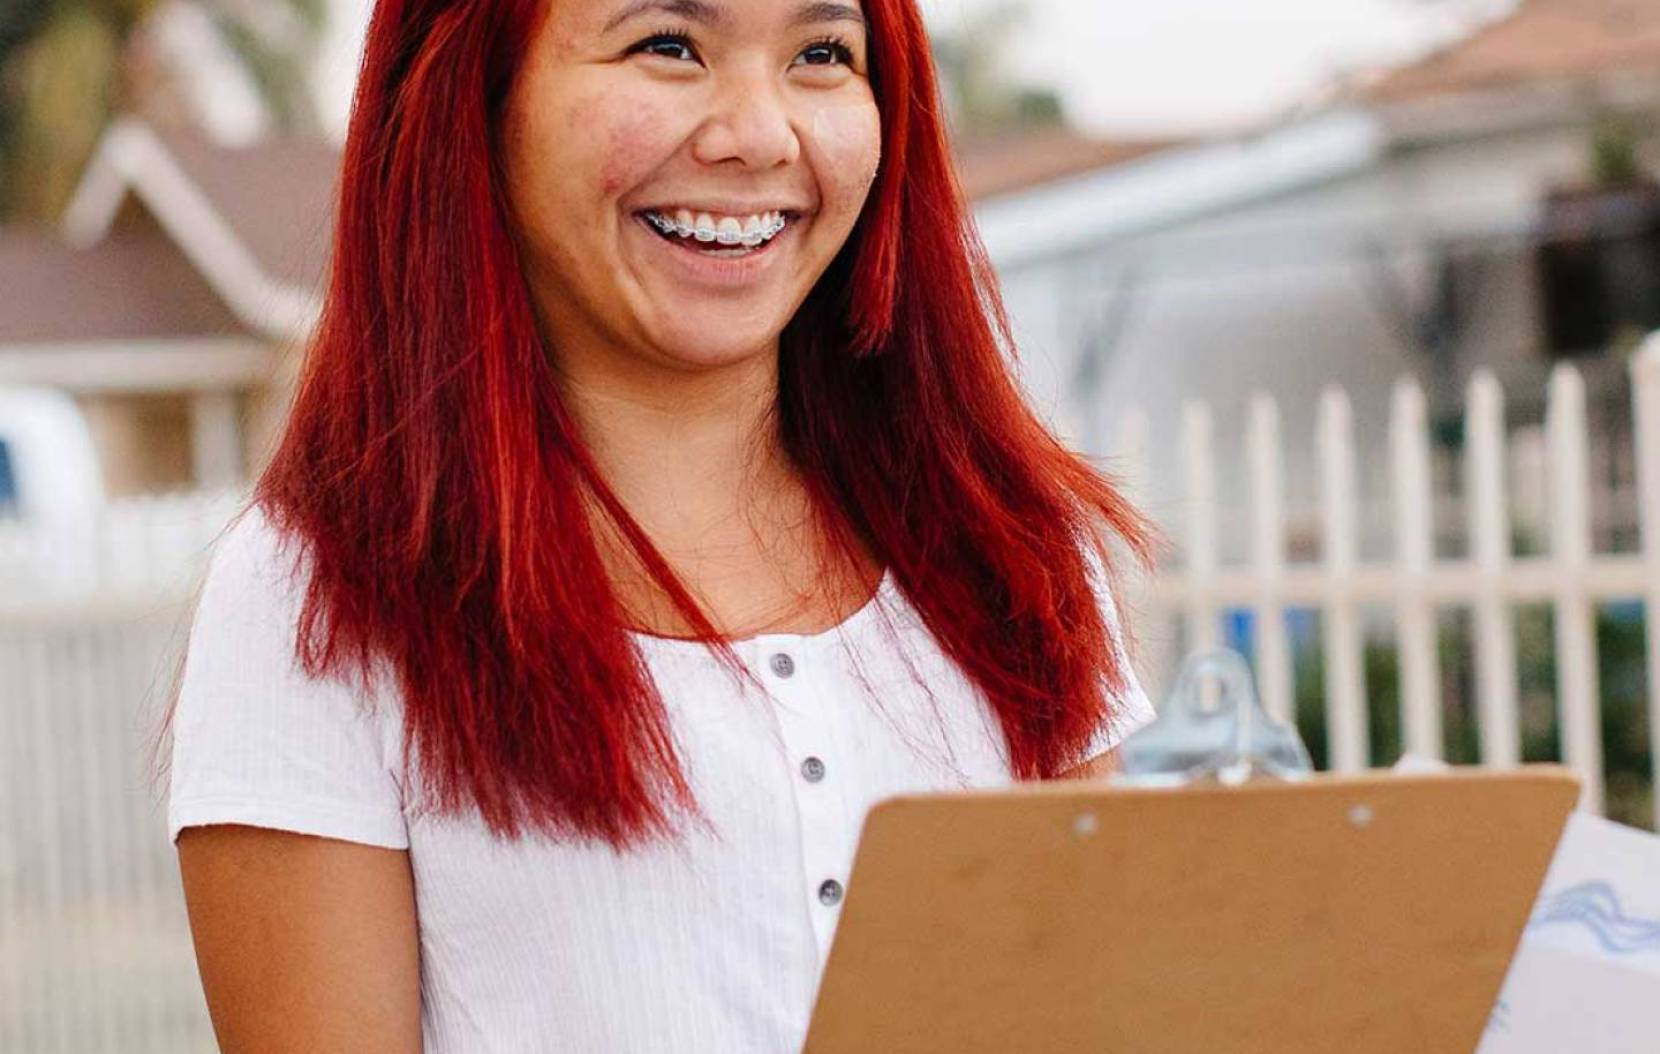 Young woman with dyed red hair holds a clipboard and smiles